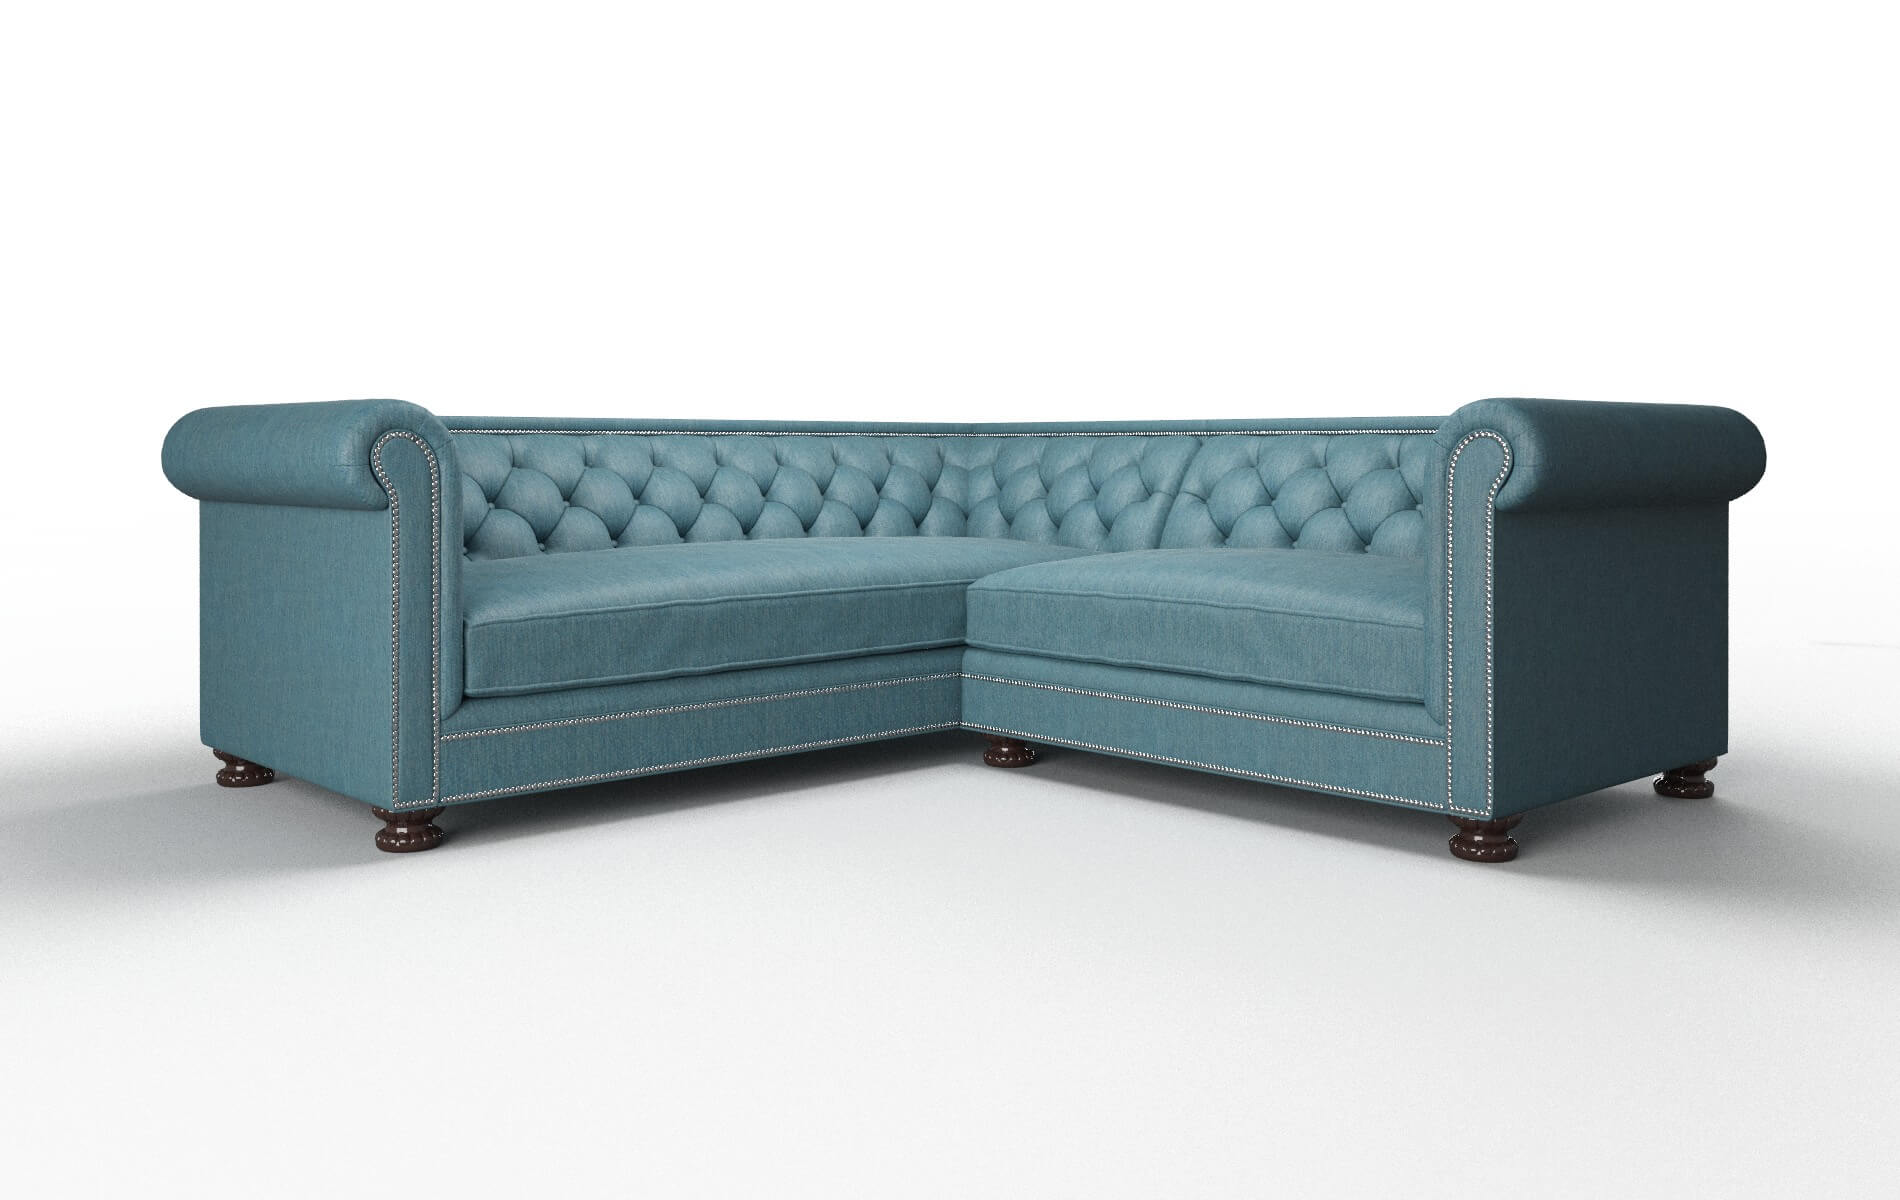 Athens Cosmo Teal chair espresso legs